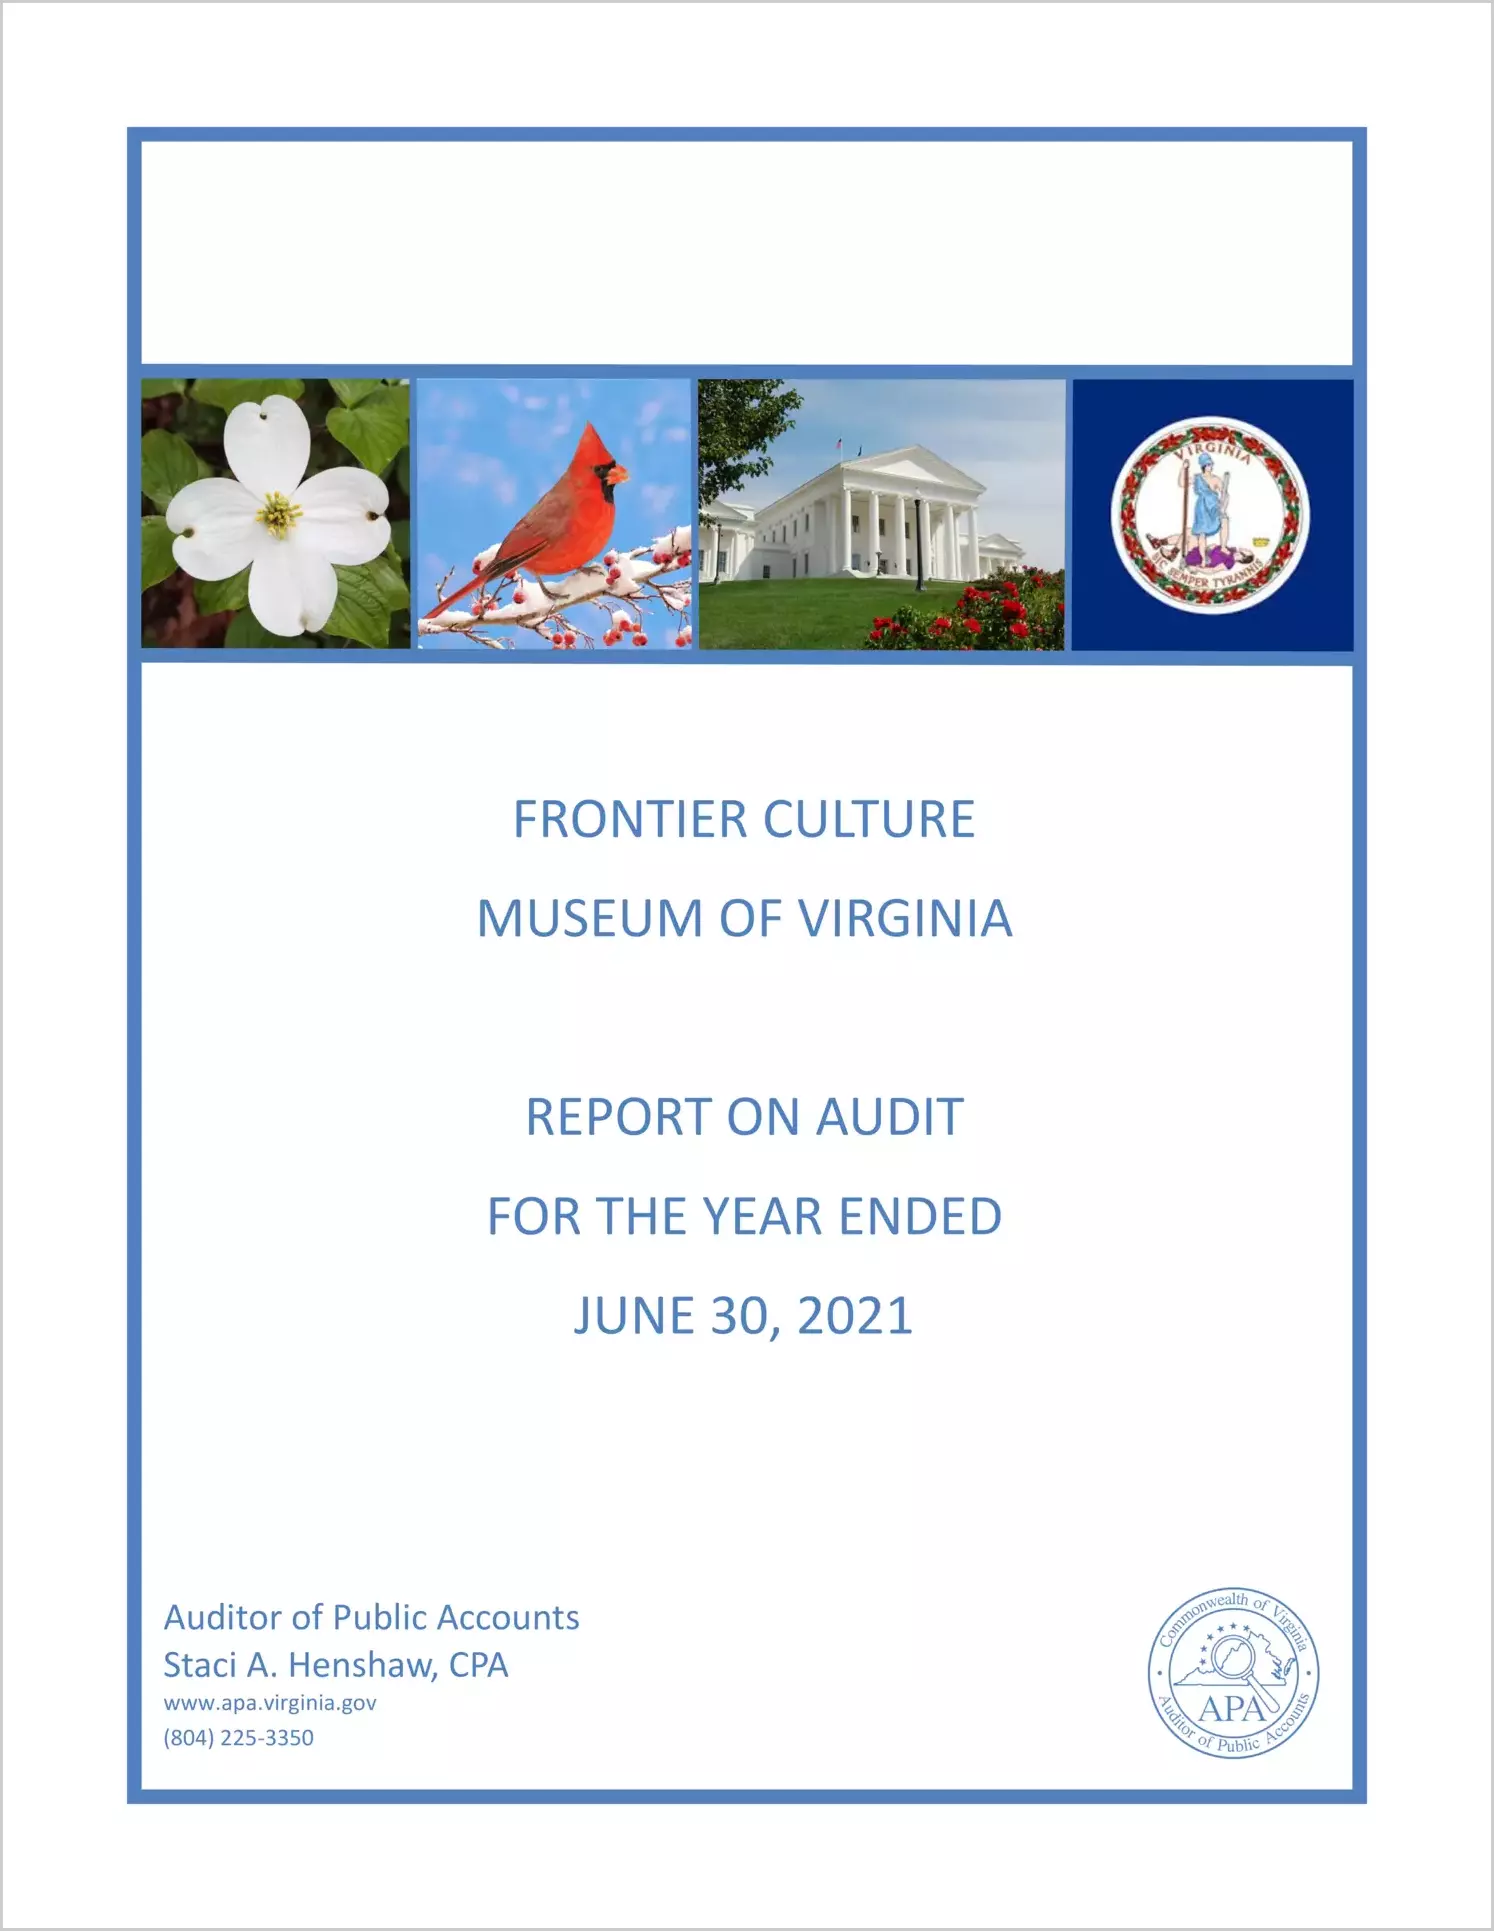 Frontier Culture Museum of Virginia for the year ended June 30, 2021